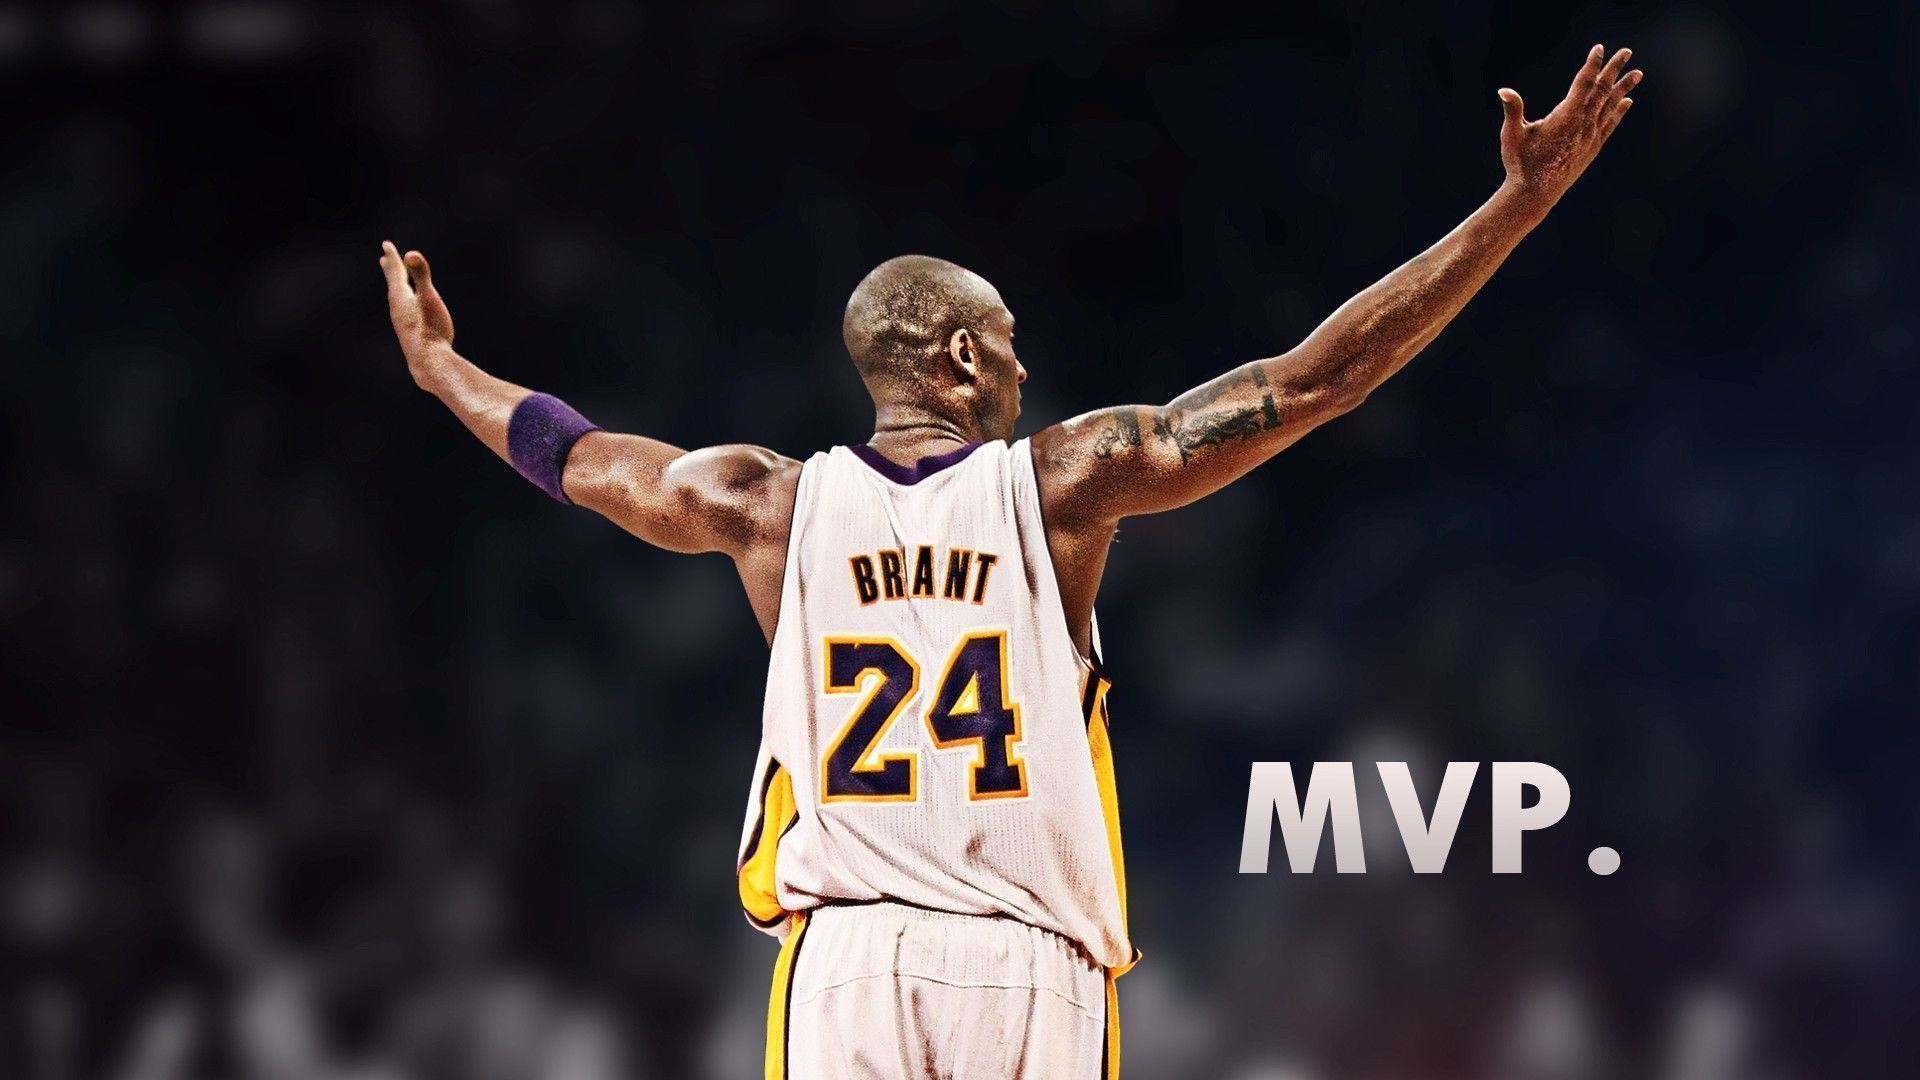 1920x1080 Kobe Bryant Dunk On Lebron James Wallpaper Widescreen Is Cool Wallpapers